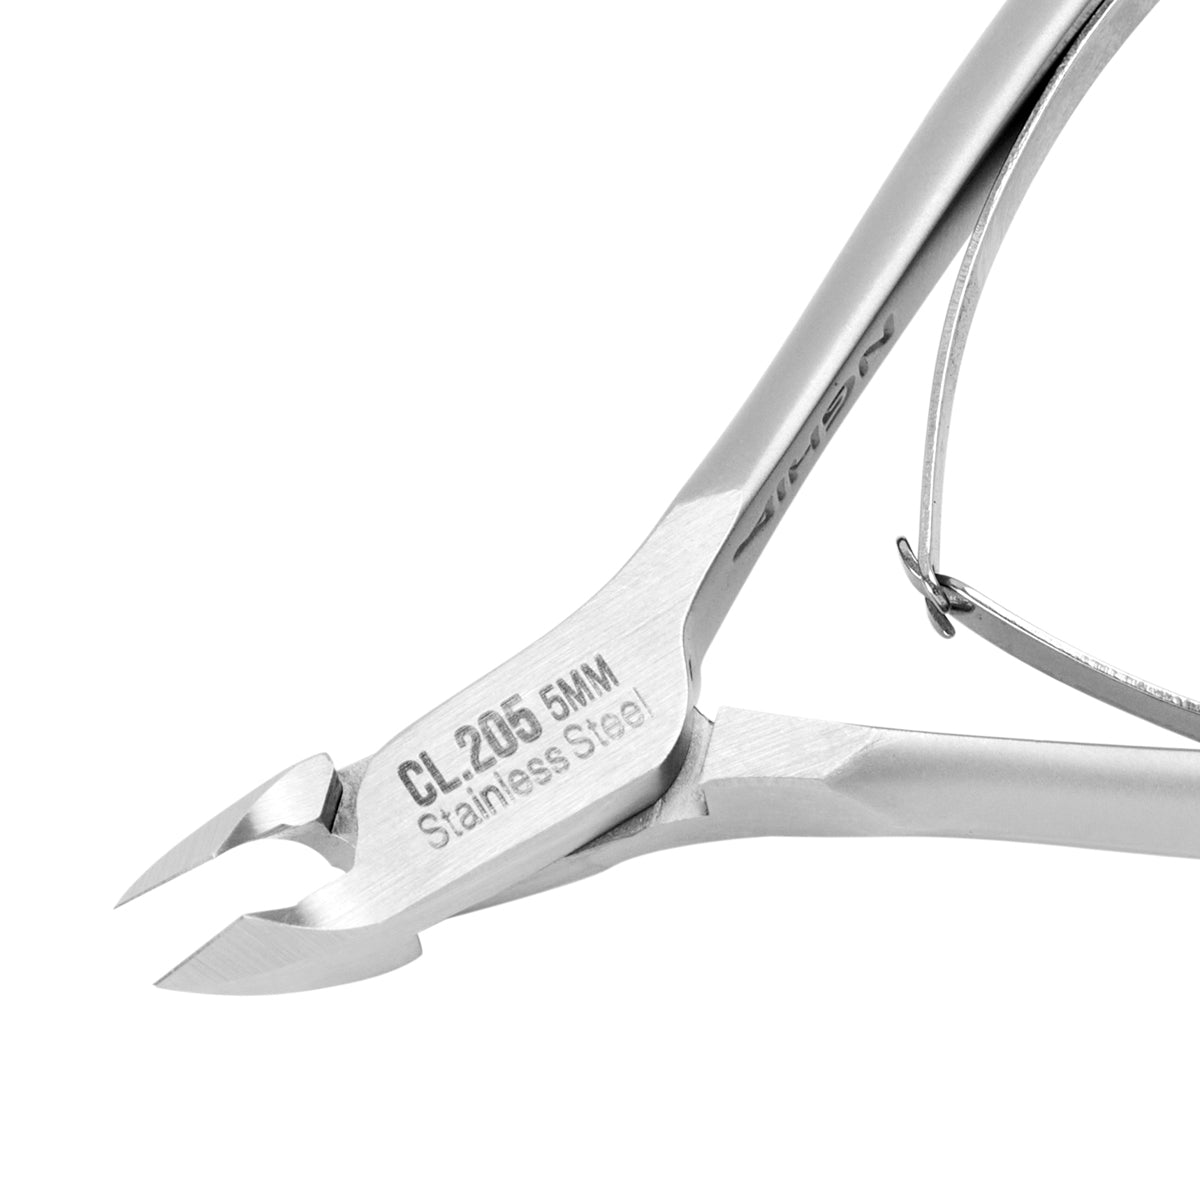 Nghia Export Cuticle Forceps CL.205 12 (5MM)